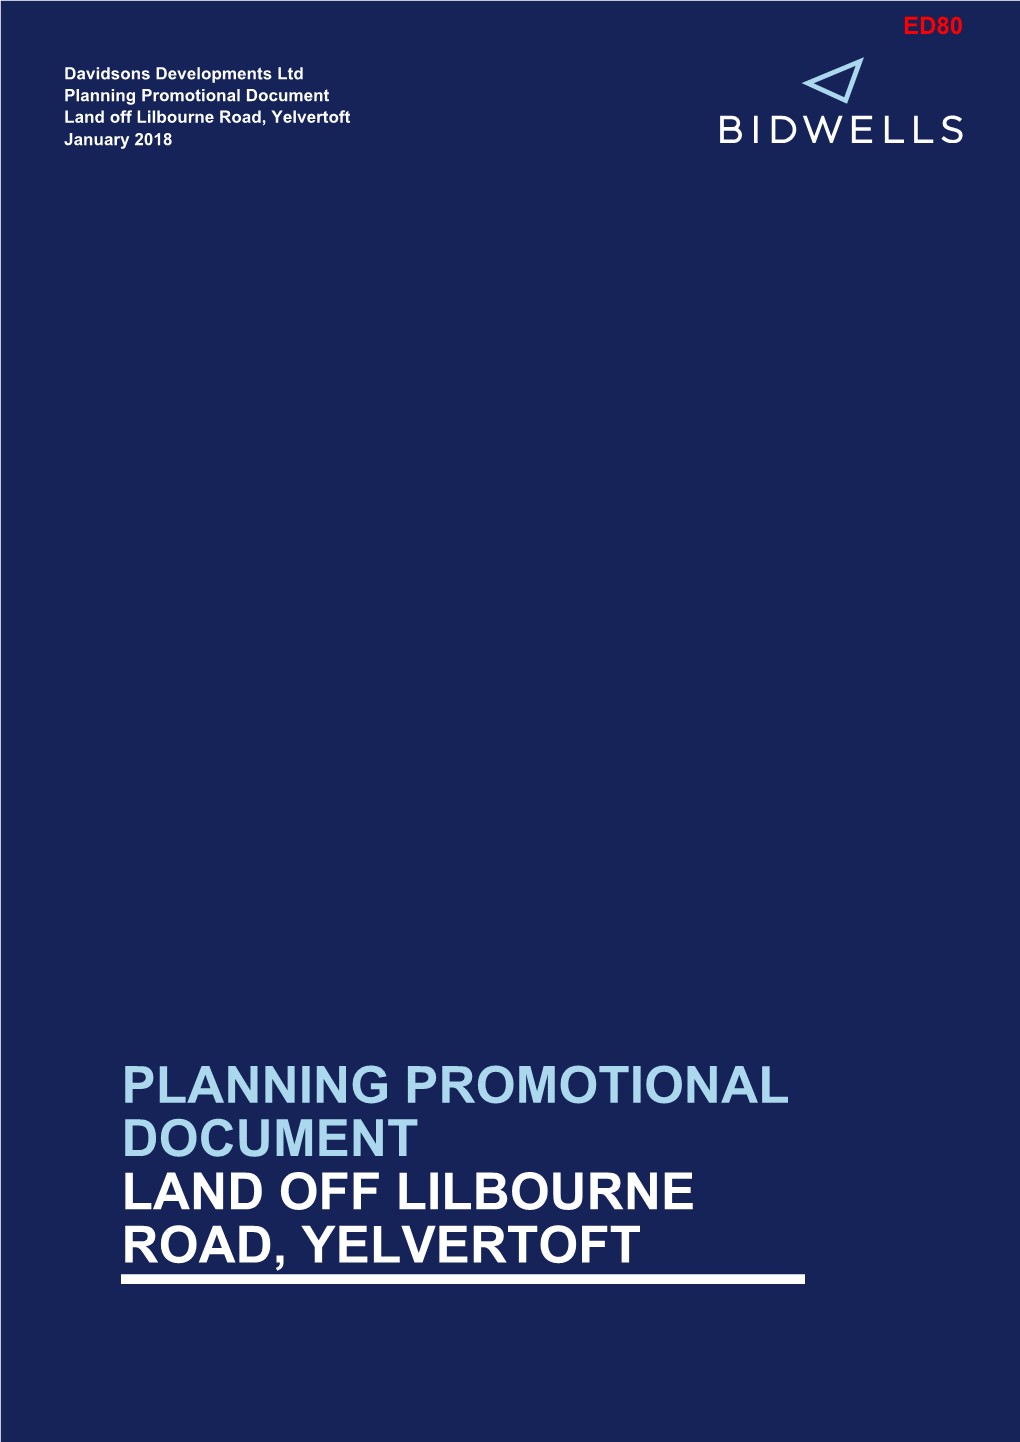 ED080 Planning Promotional Document